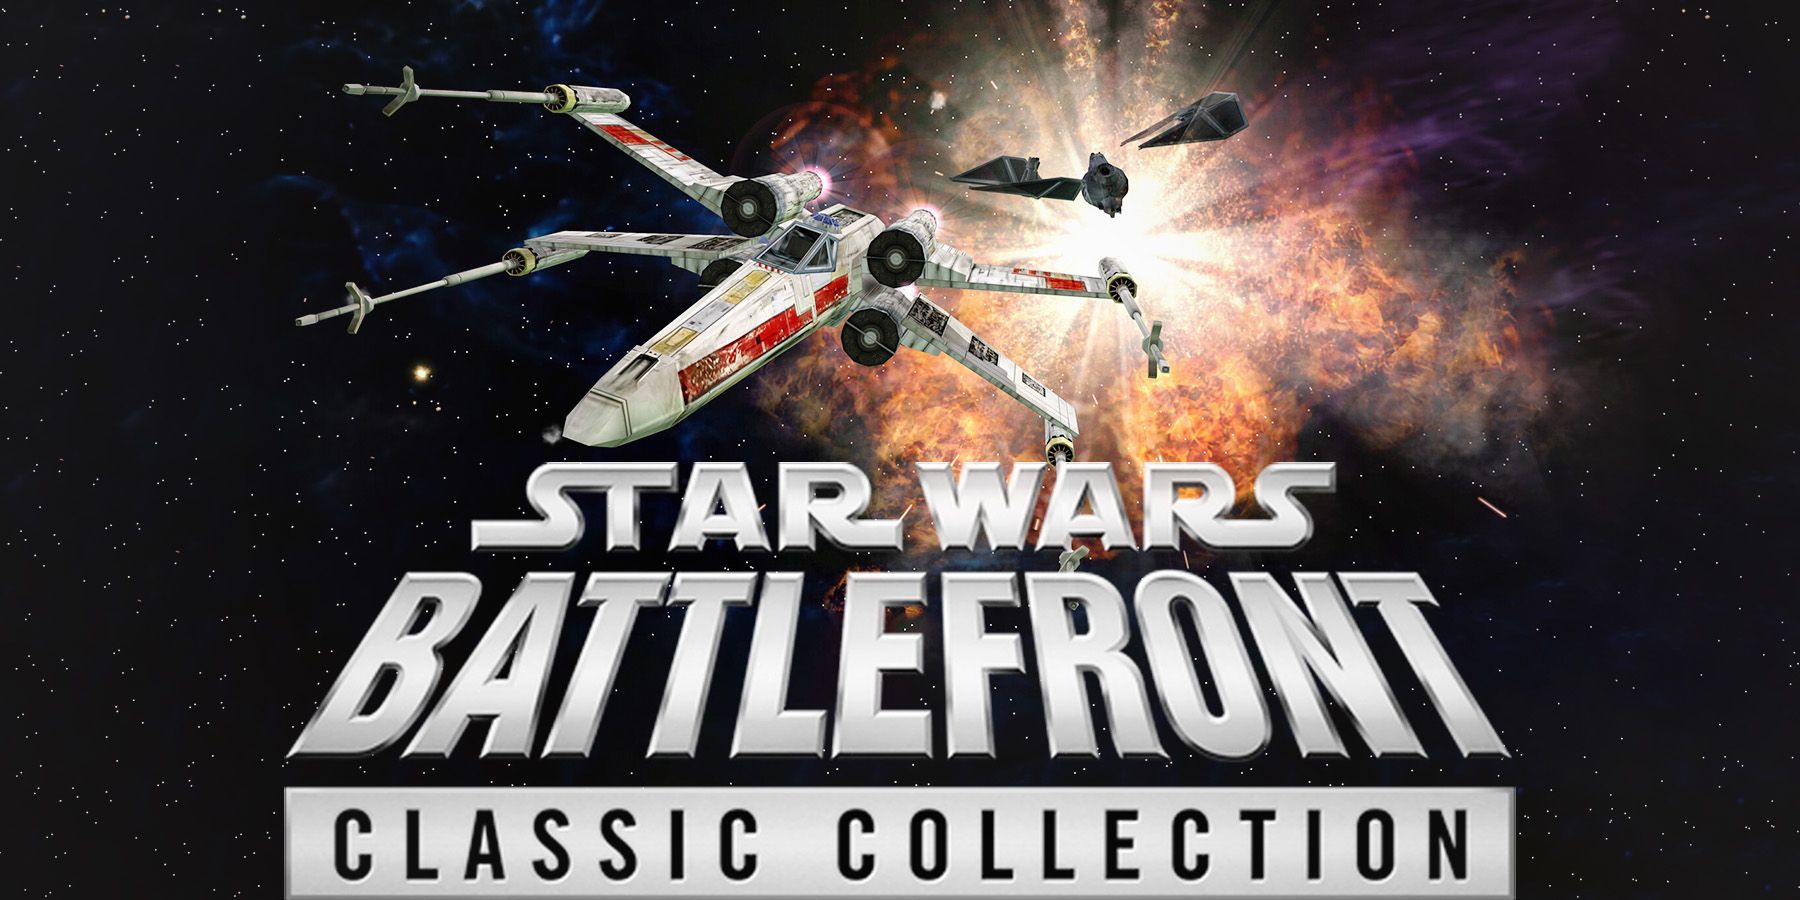 Star Wars Battlefront Classic Collection X-wing promo screenshot with game logo